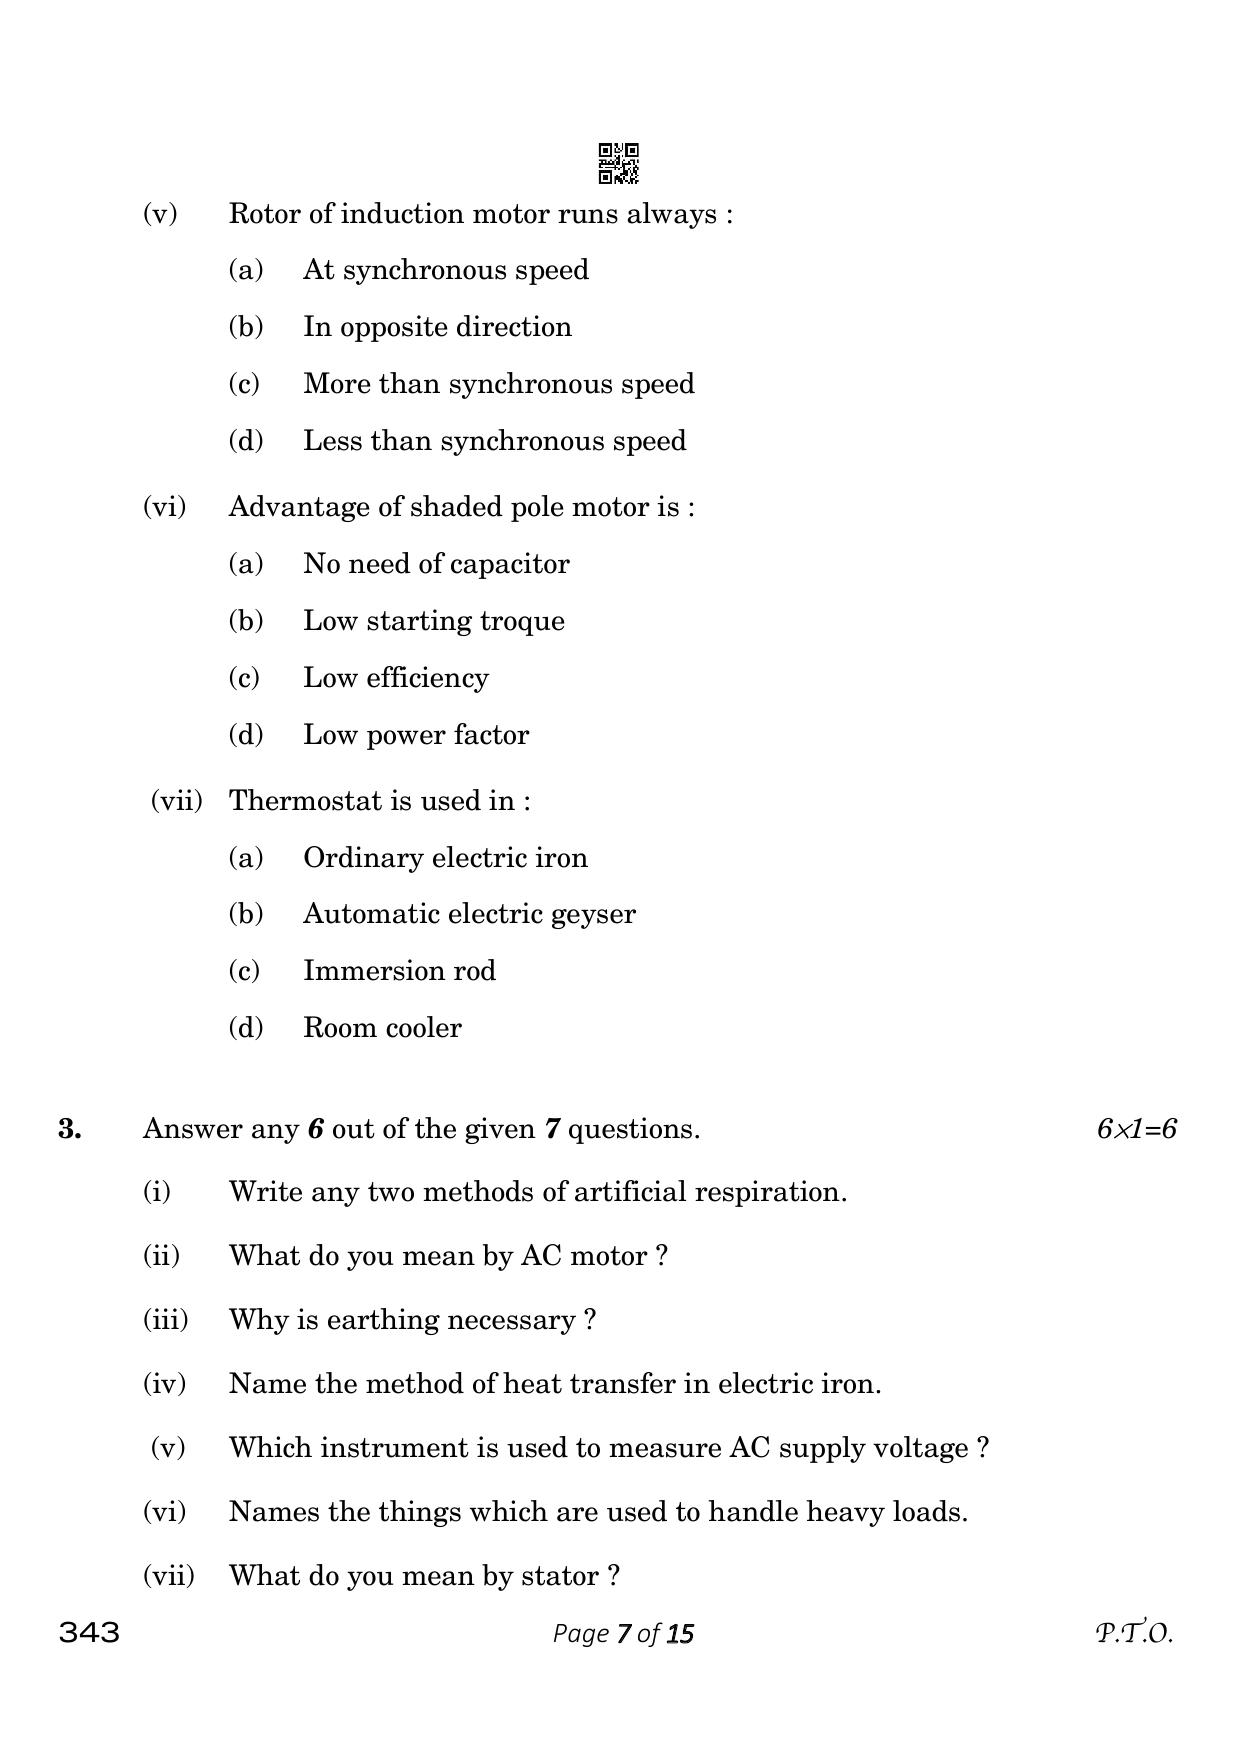 CBSE Class 12 343_Electrical Technology 2023 Question Paper - Page 7